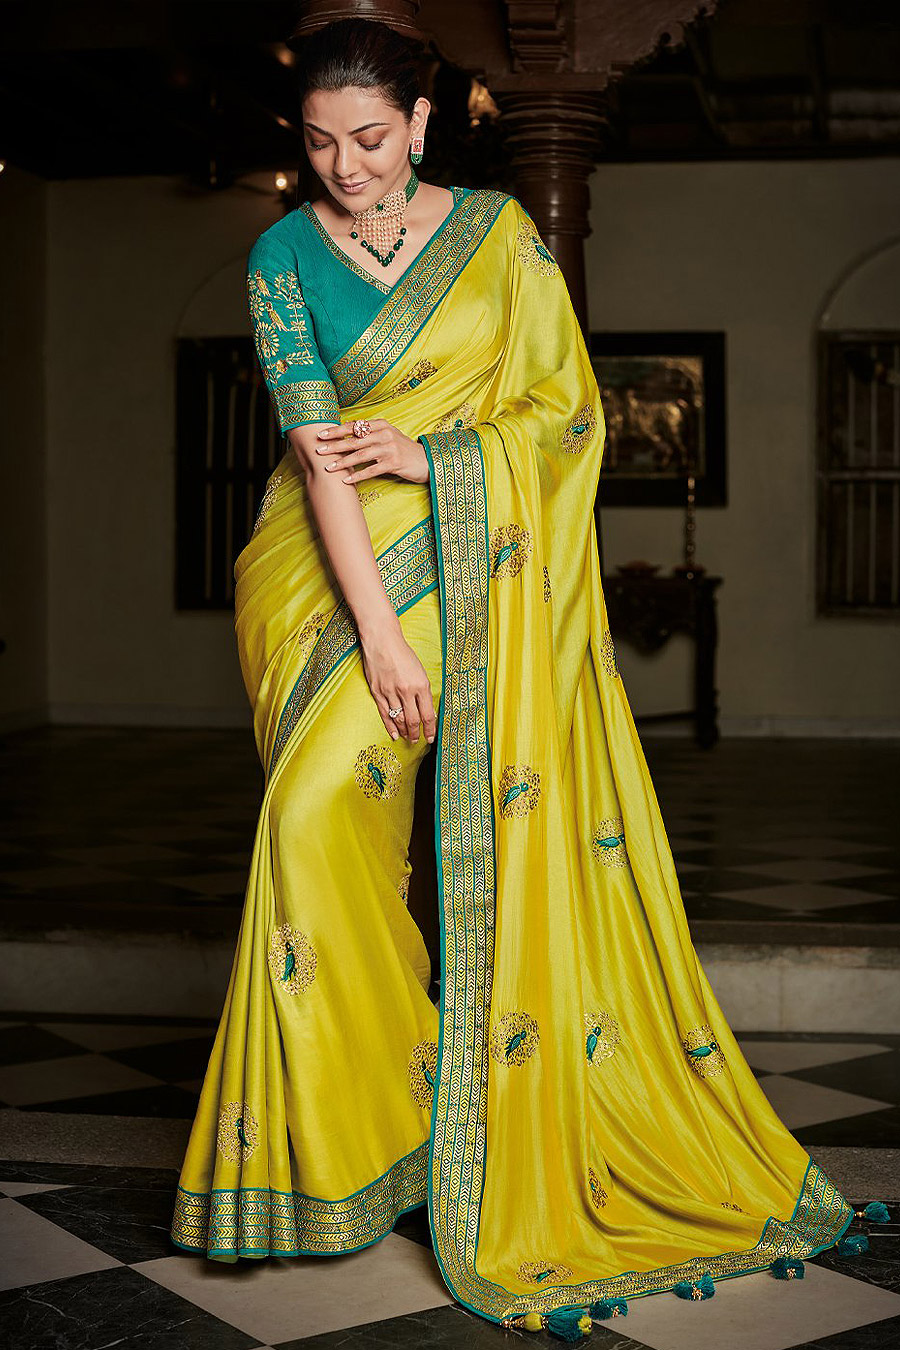 Lime Yellow Silk Embroidered Saree